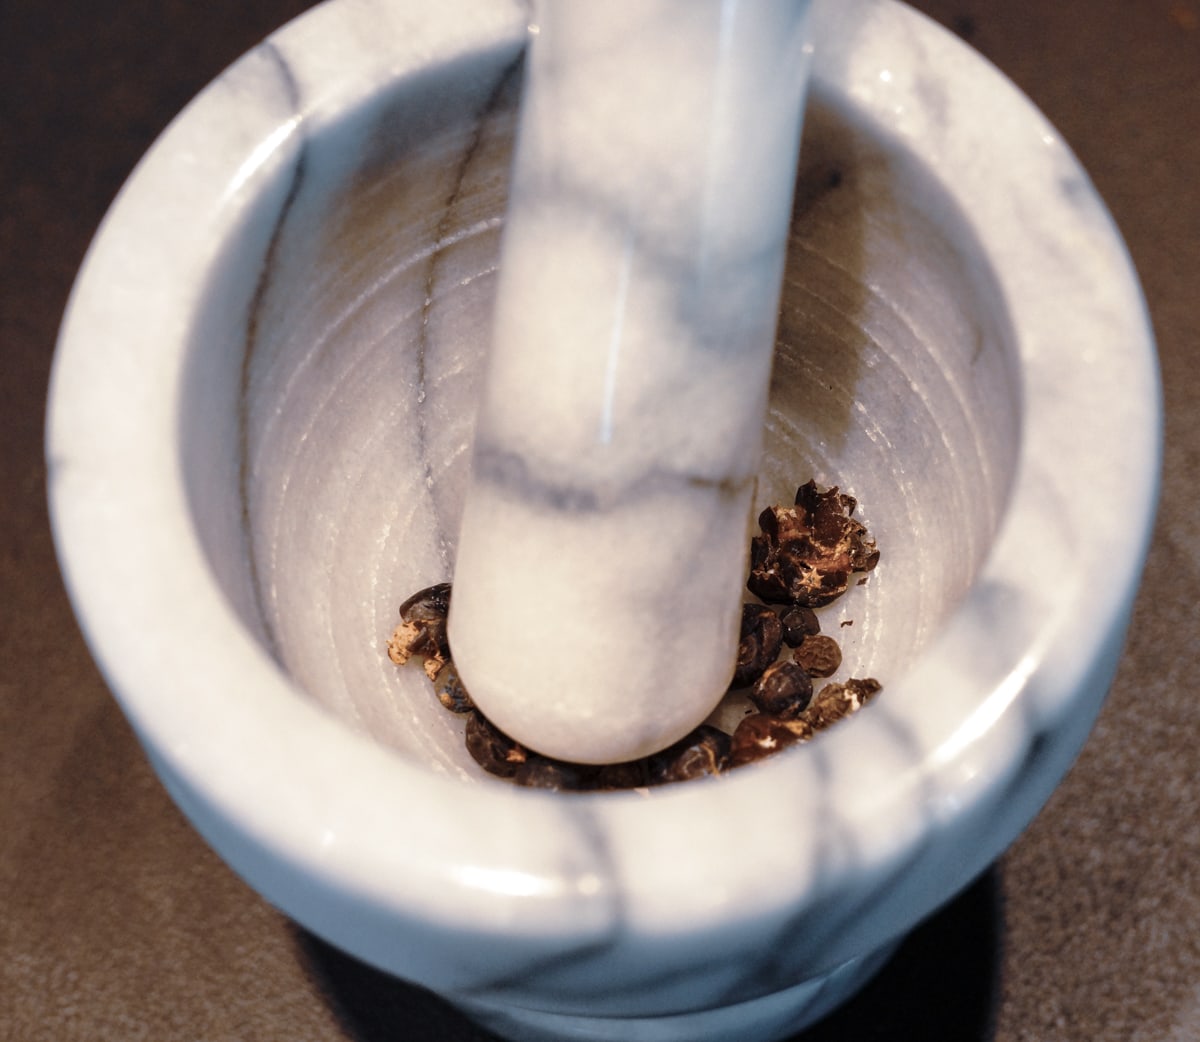 Crushing spices with a mortar and pestle. 